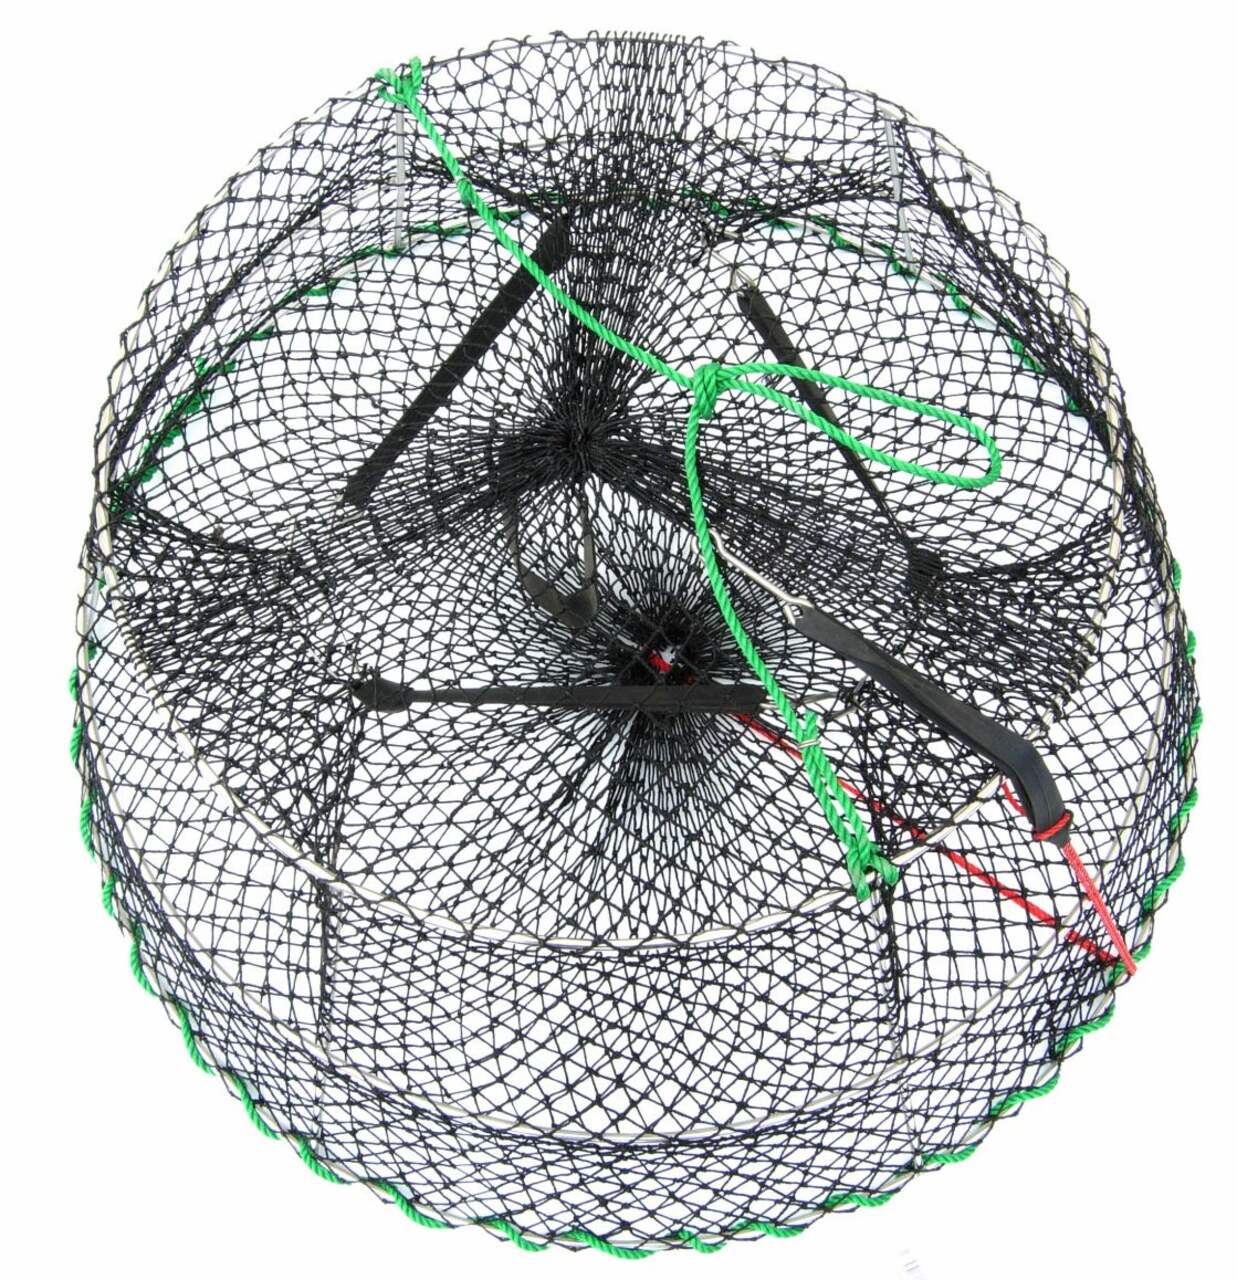 https://media-www.canadiantire.ca/product/playing/fishing/fishing-equipment/1781397/sea-king-deluxe-prawn-trap-f811de8f-d8cc-4e74-b457-38e861496260-jpgrendition.jpg?imdensity=1&imwidth=640&impolicy=mZoom